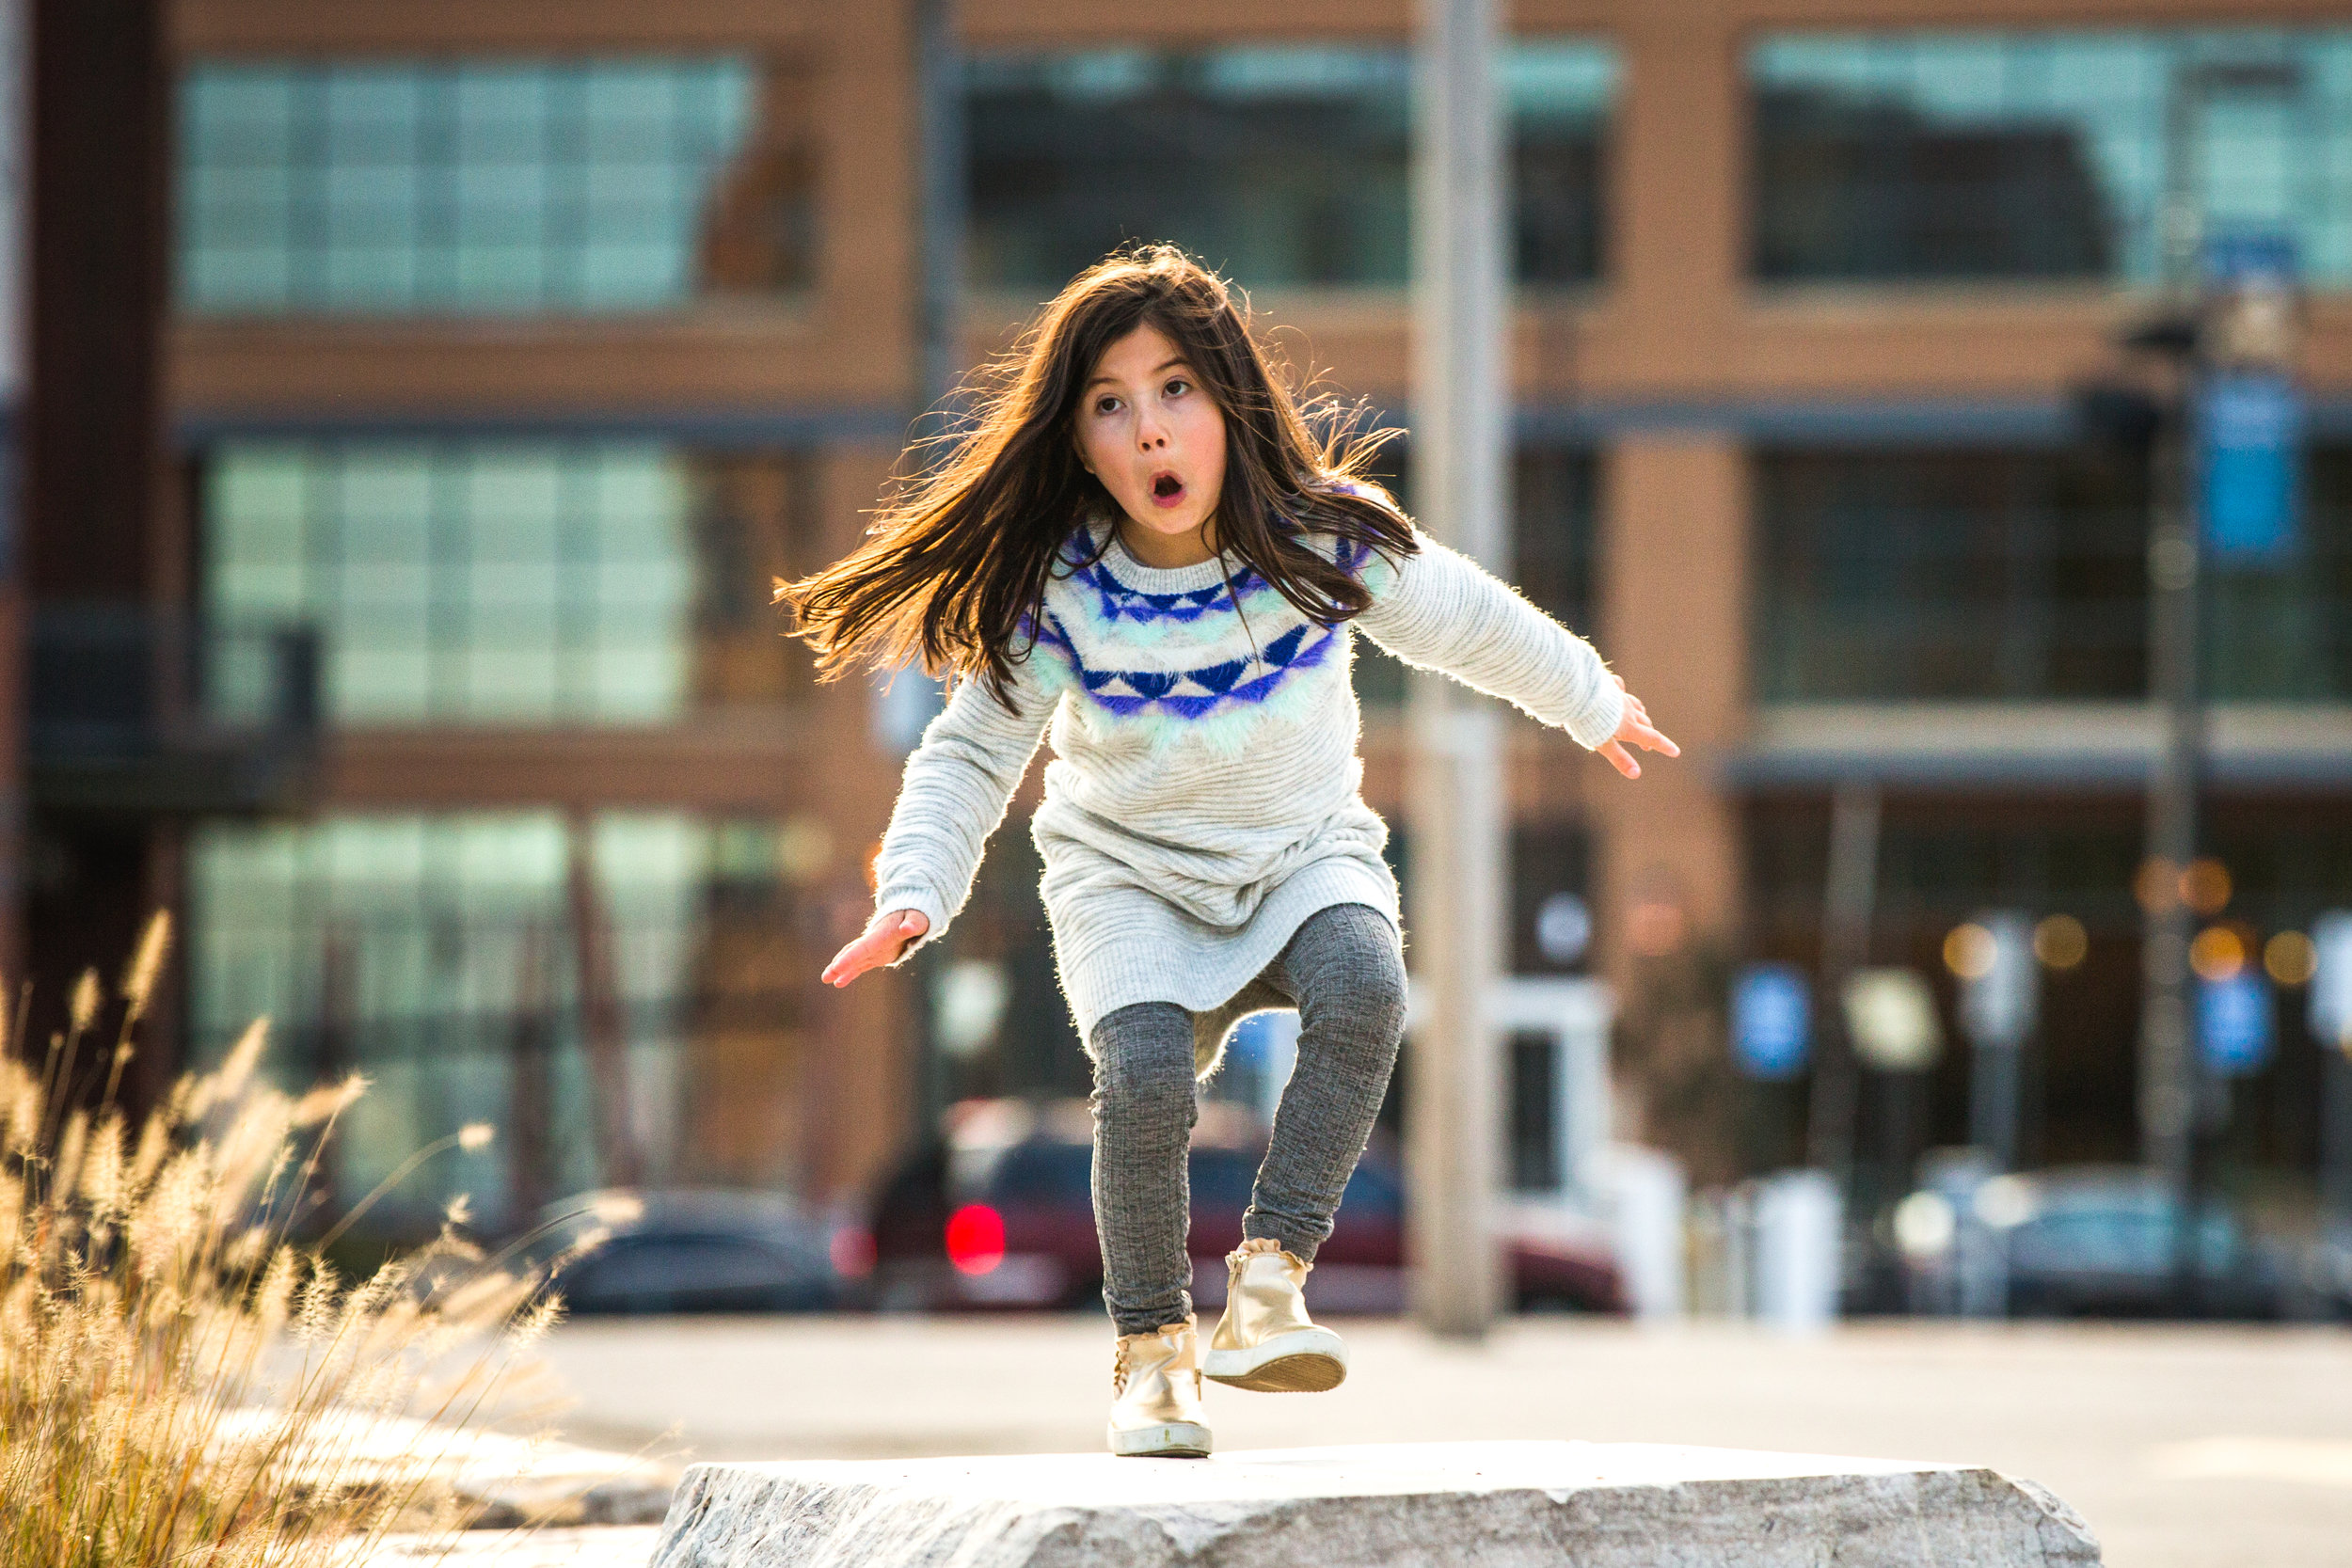 girl with long hair in pretty dress plays by hopping on concrete barrier in the city